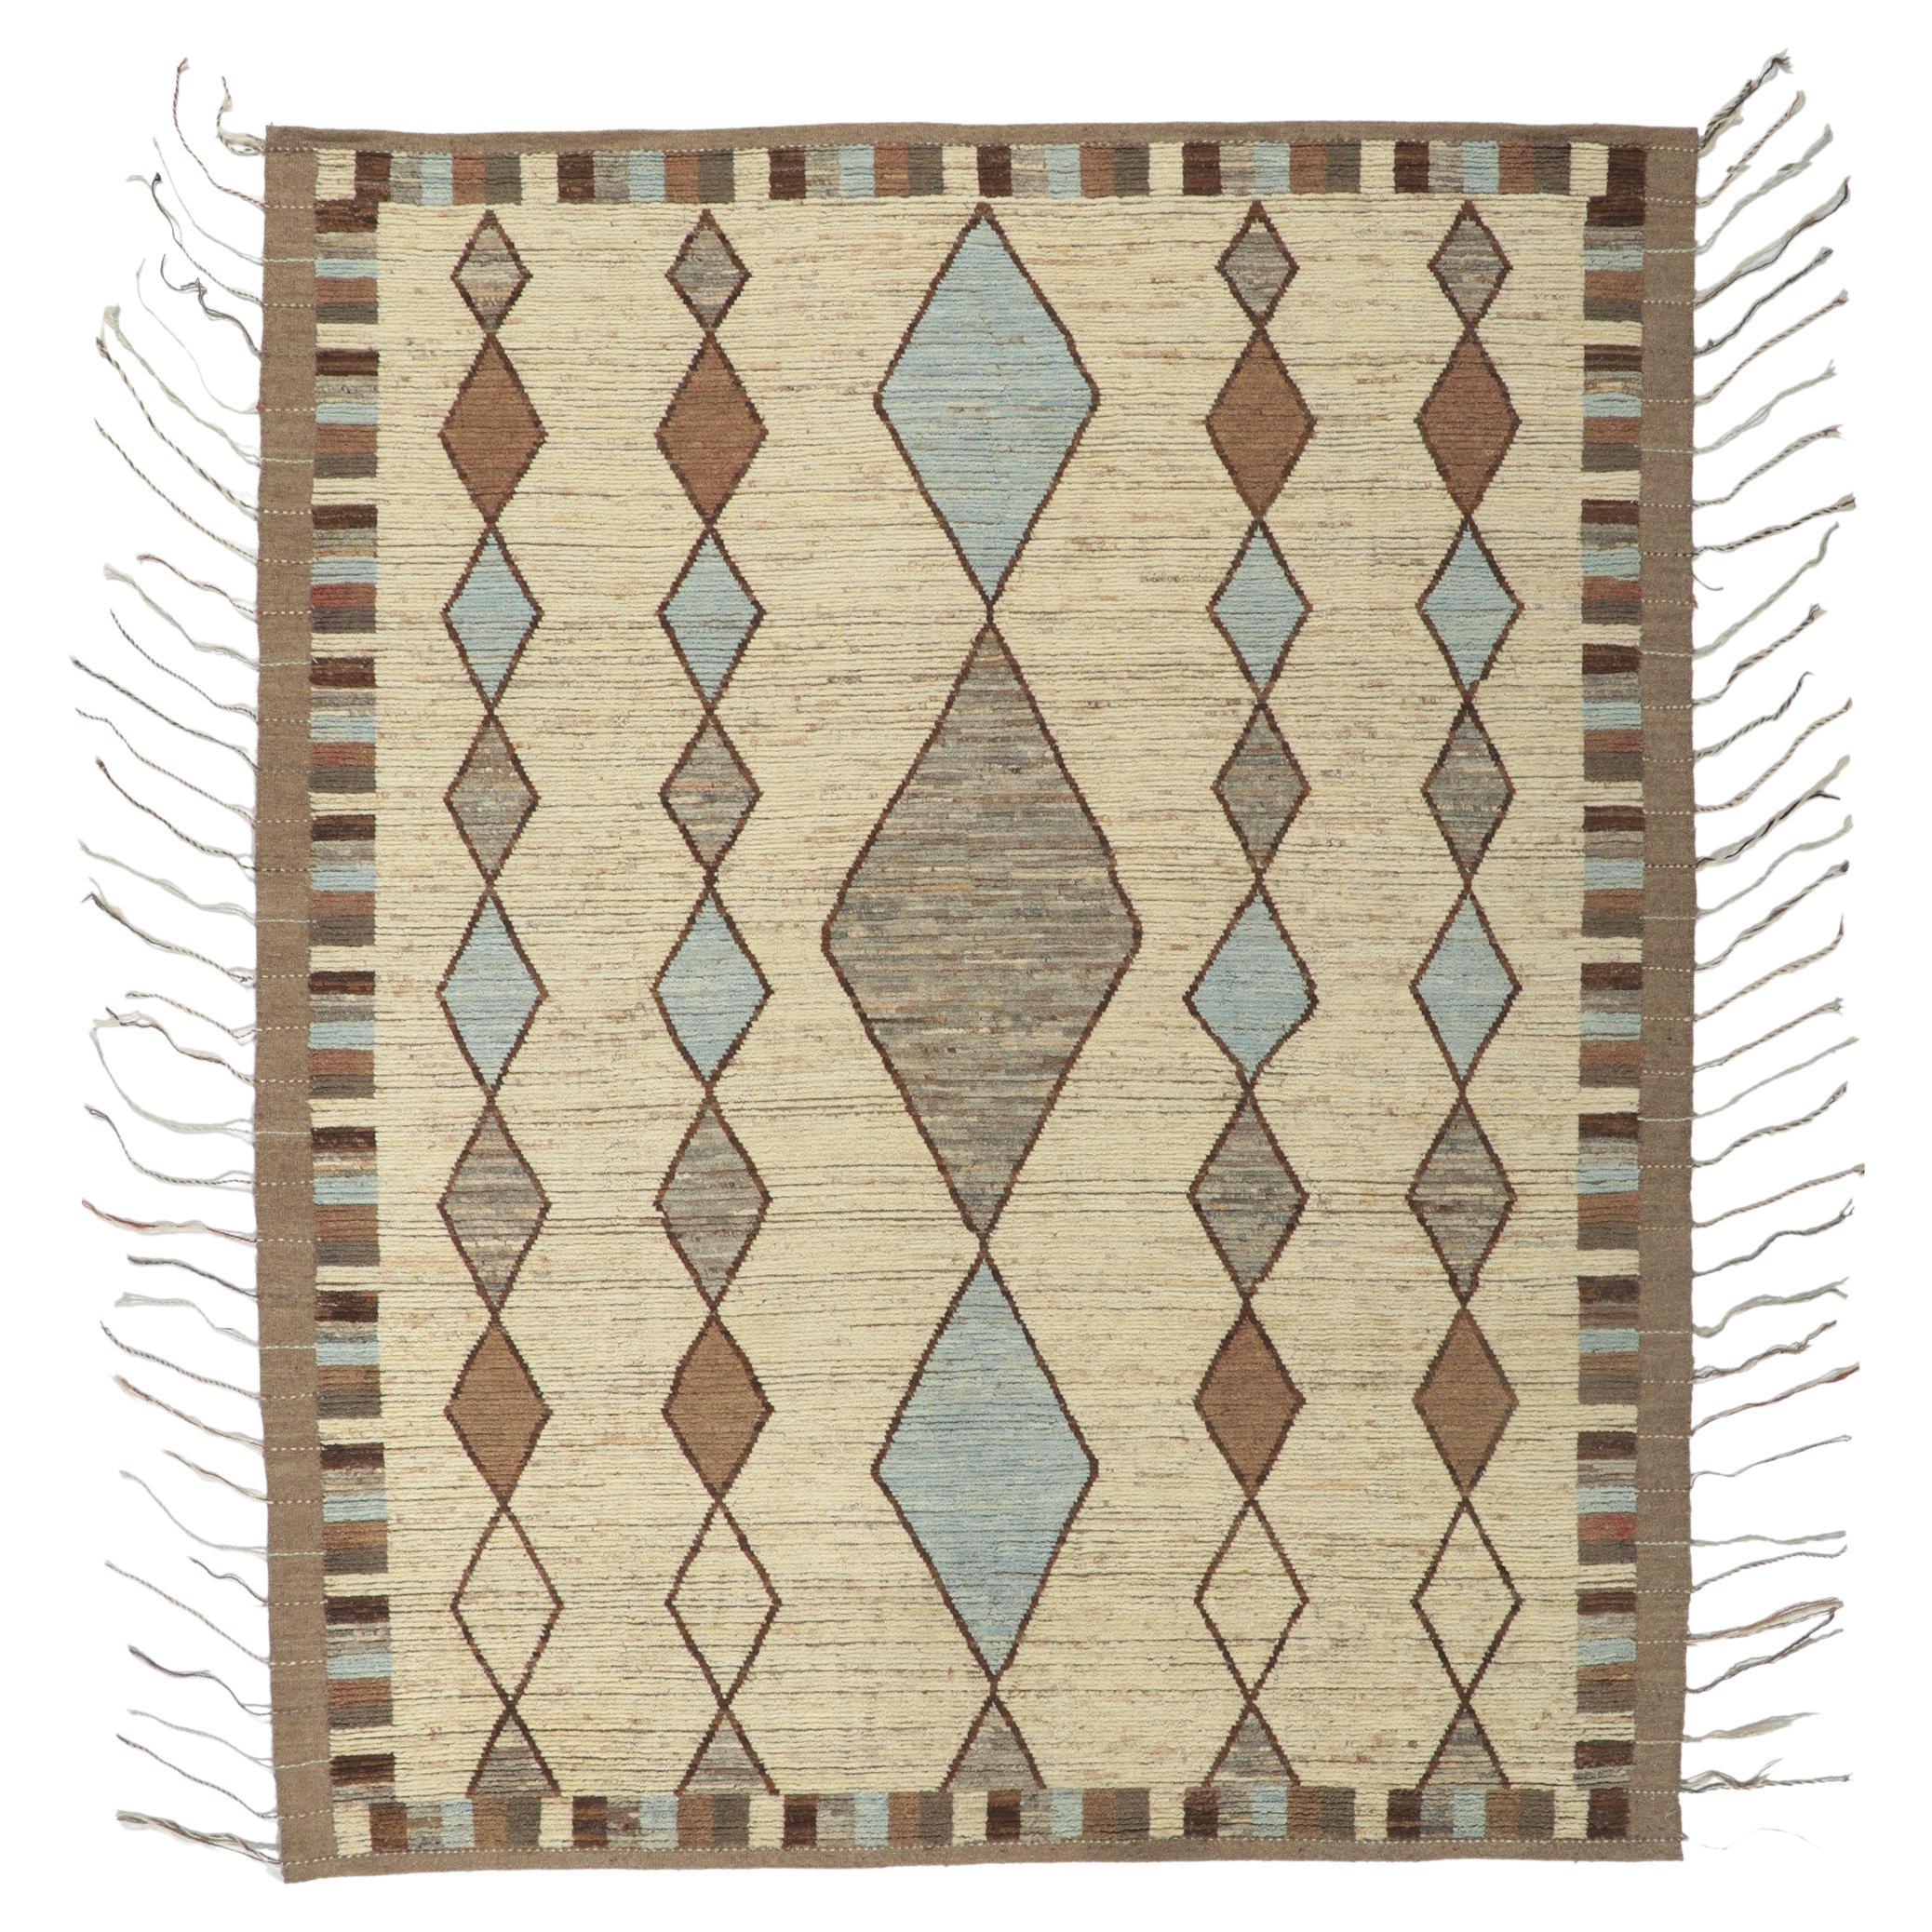 Earth-Tone Moroccan Style Rug, Tribal Enchantment Meets Contemporary Elegance